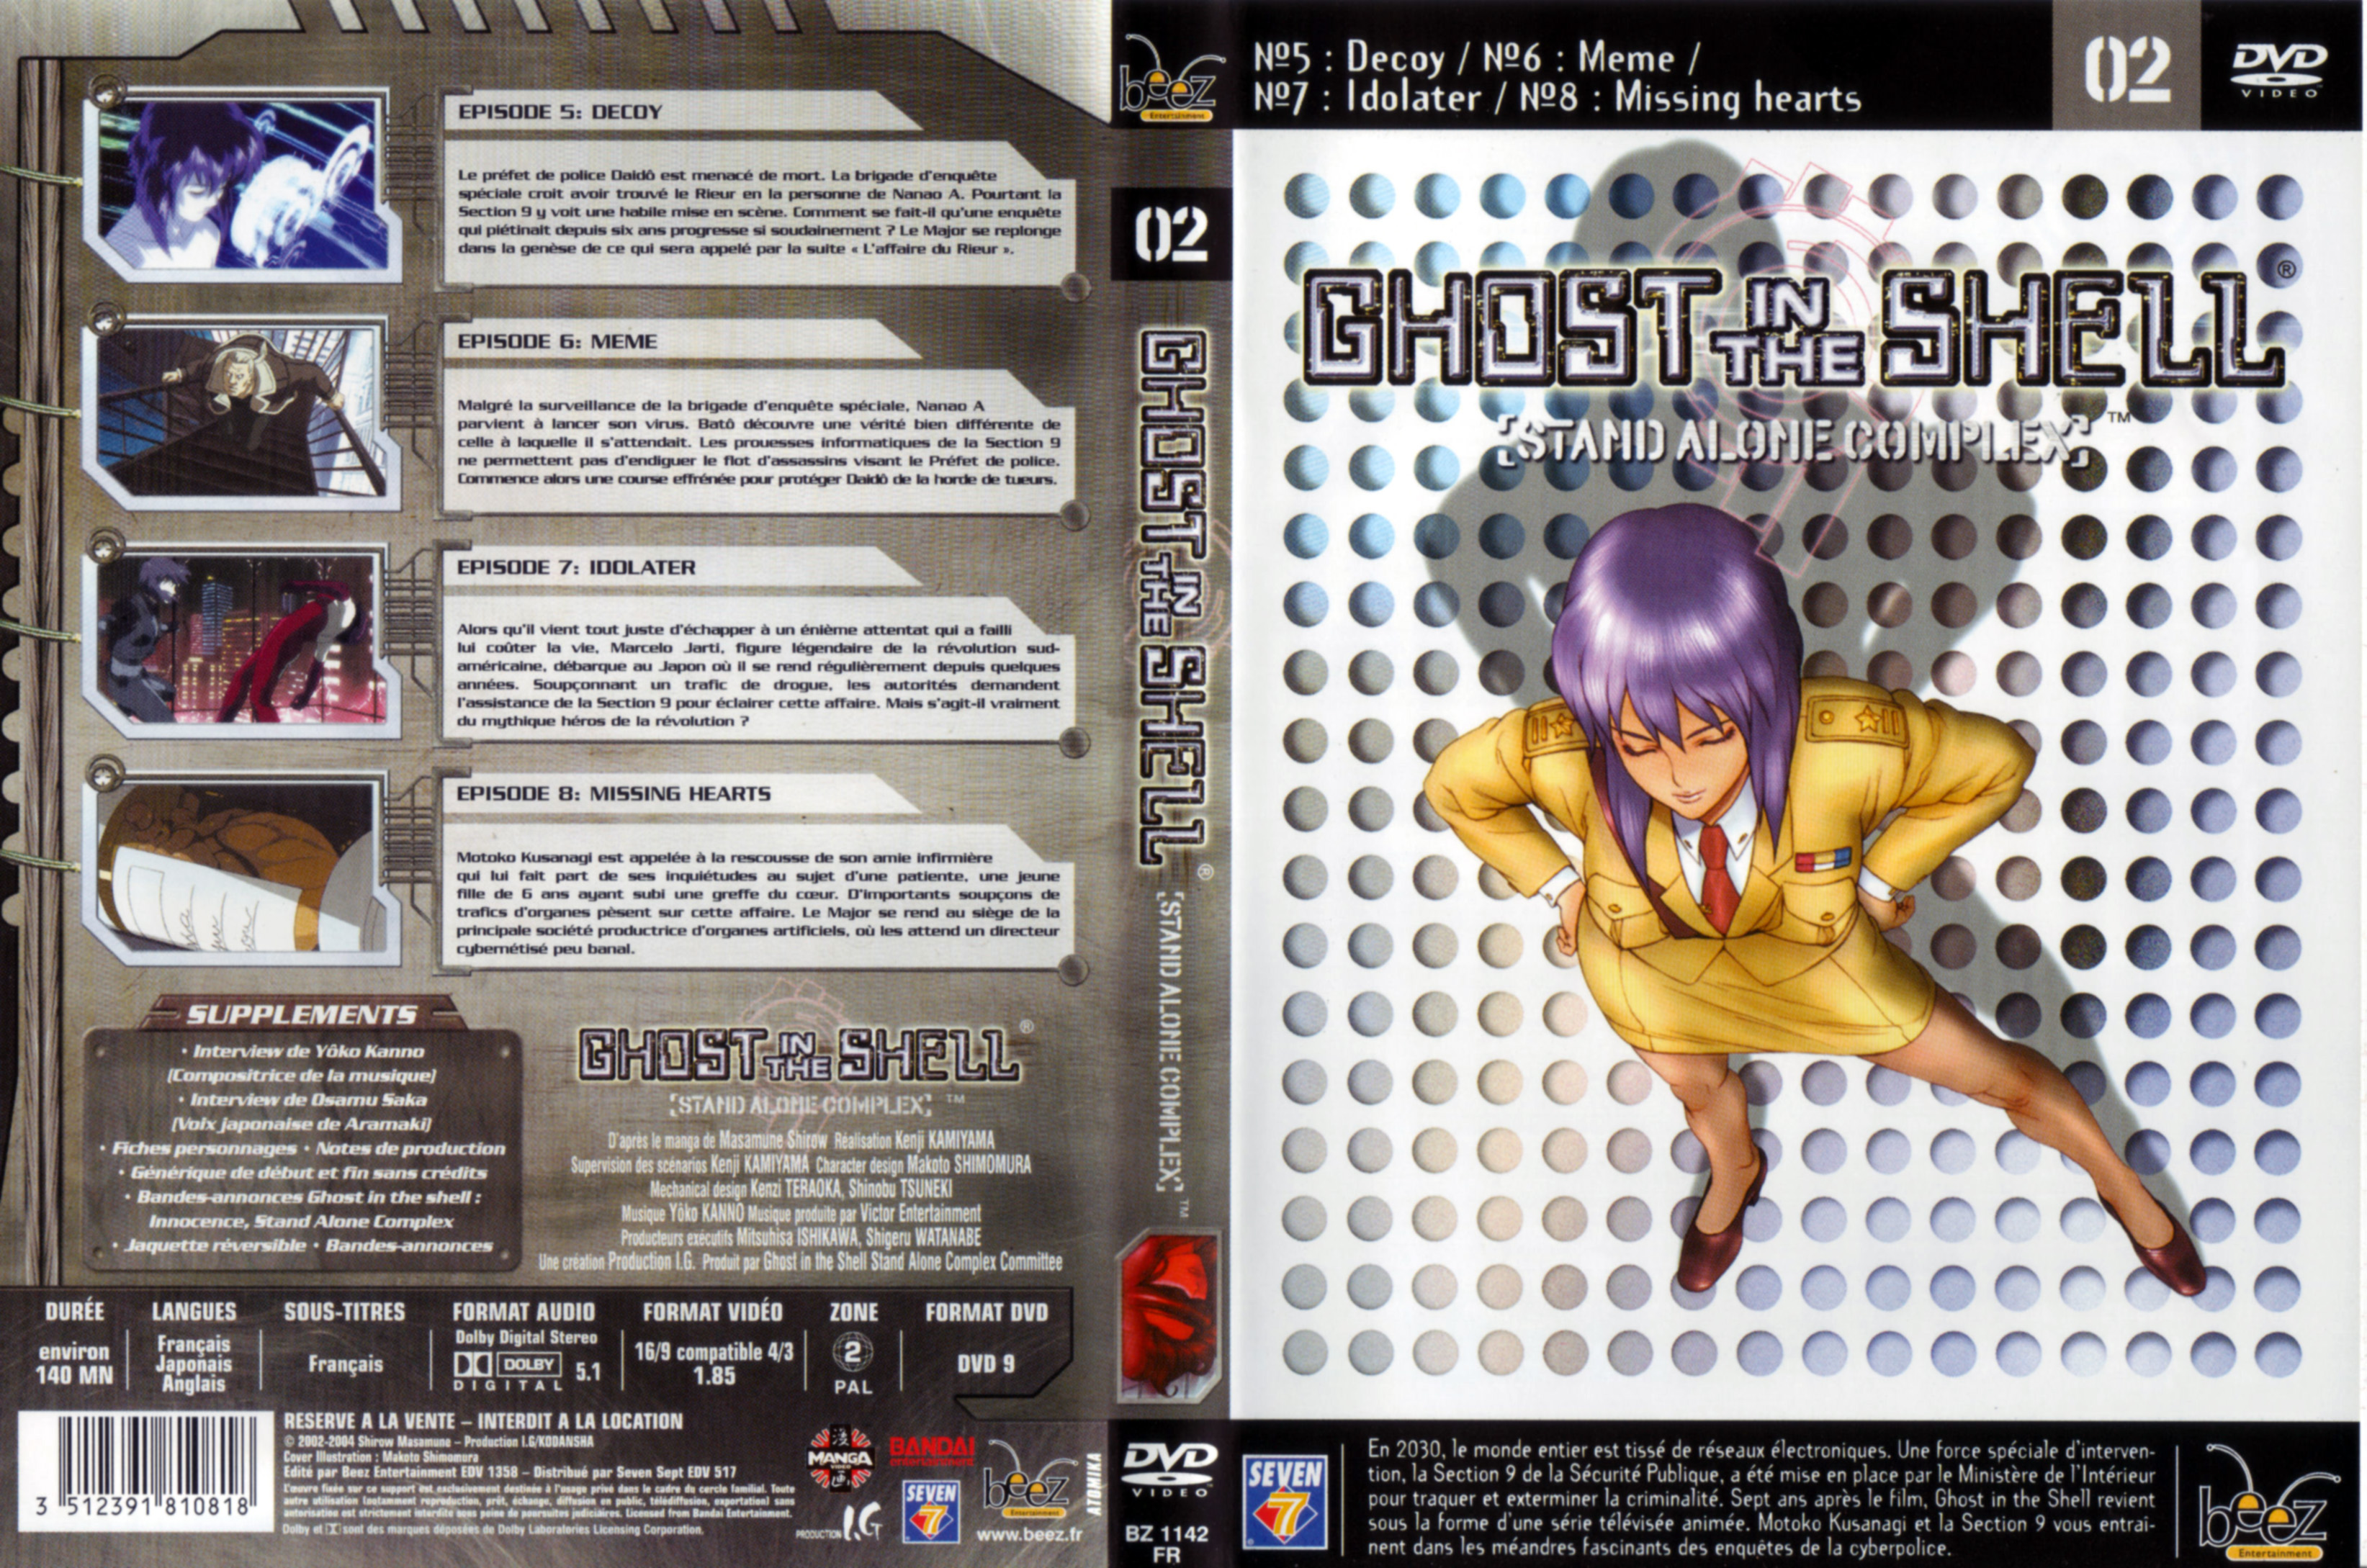 Jaquette DVD Ghost in the shell - stand alone complex vol 2 v2